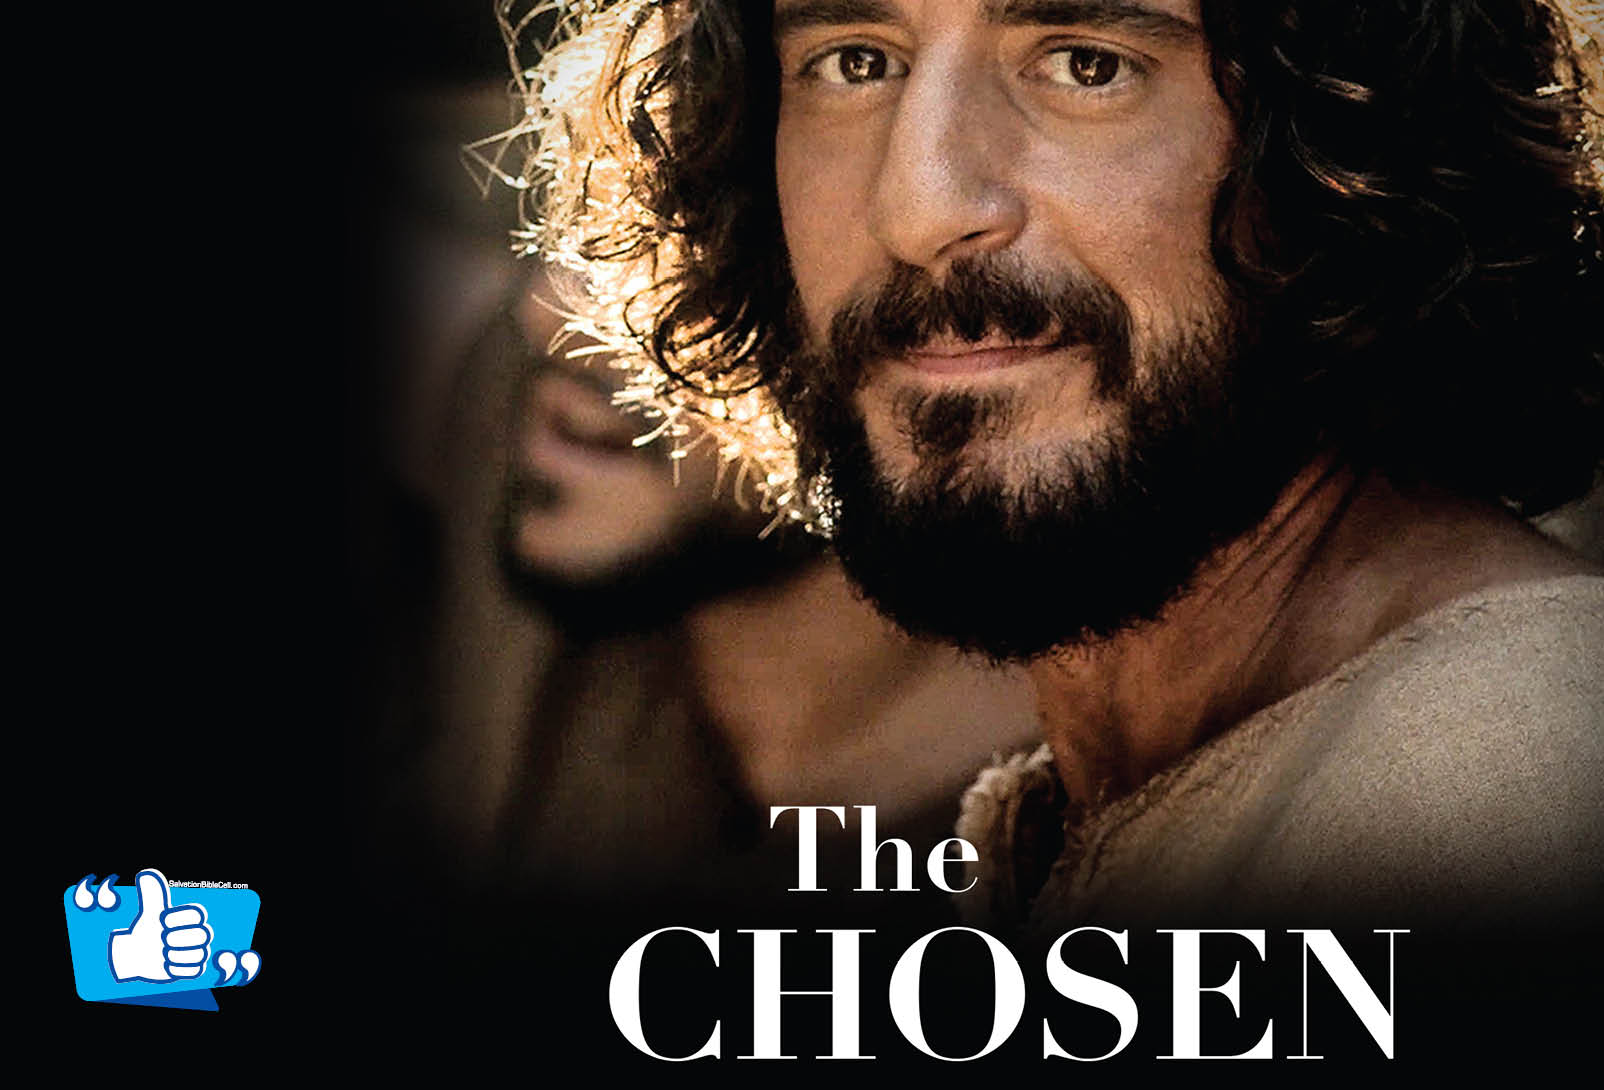 The Chosen – Introduction